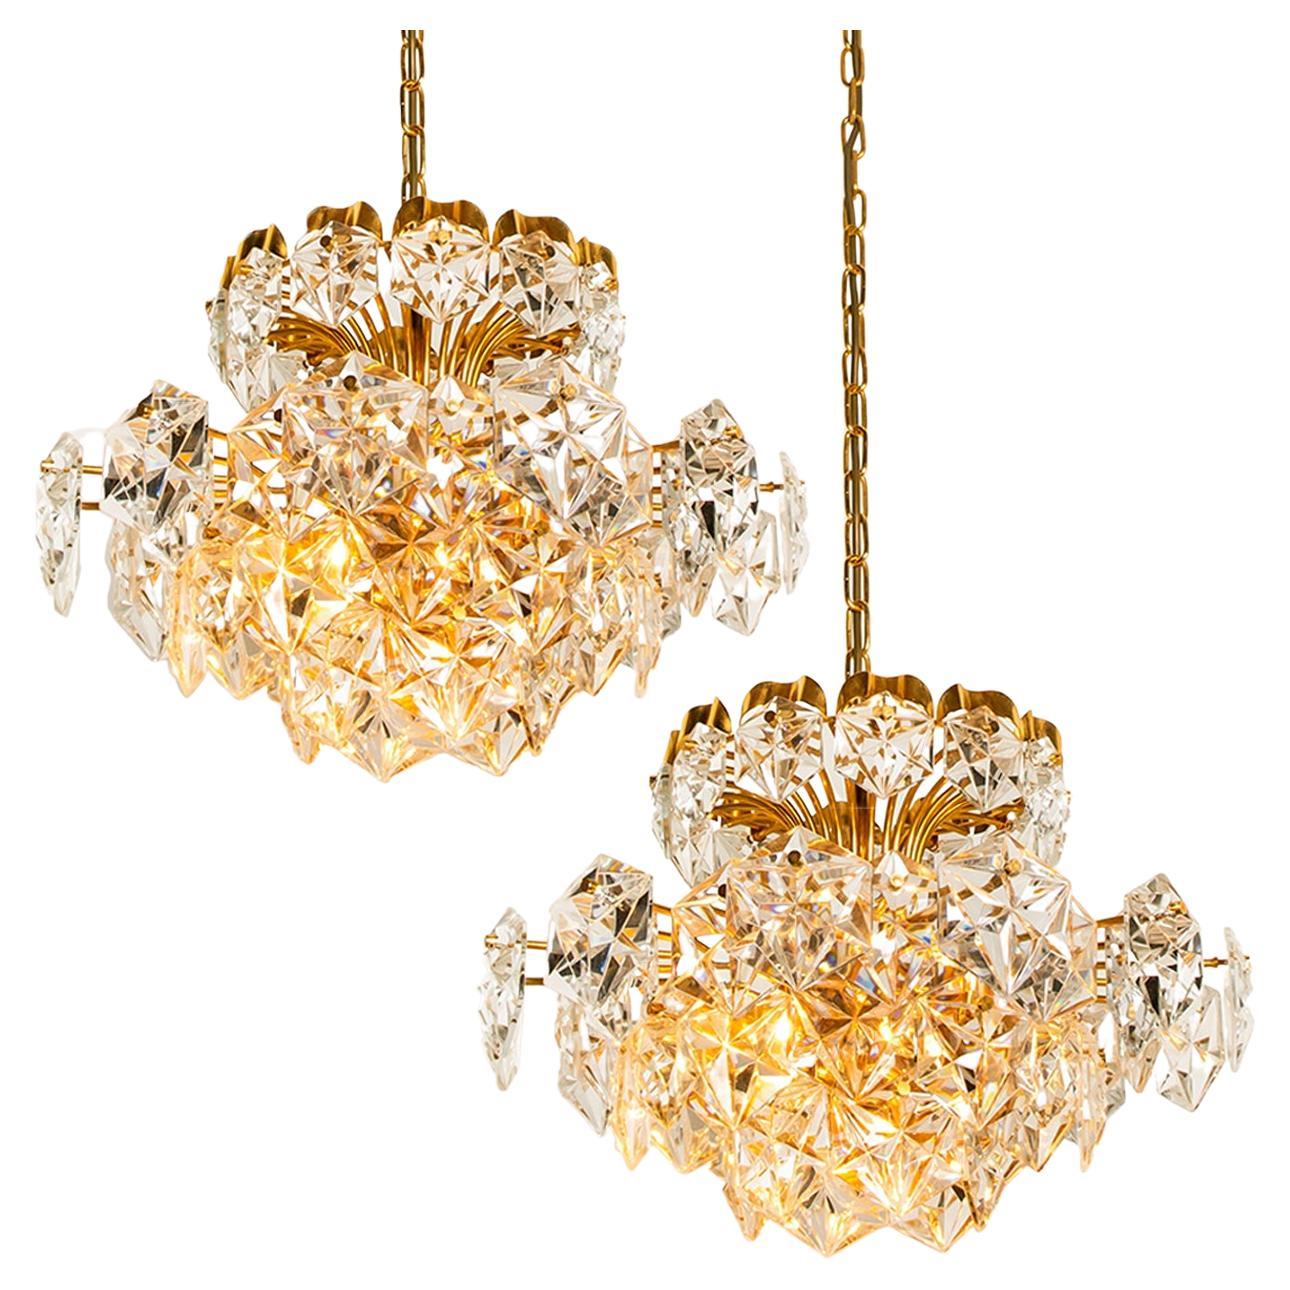 Pair of Two Layer Faceted Crystal Chandeliers Kinkeldey, 1970 For Sale